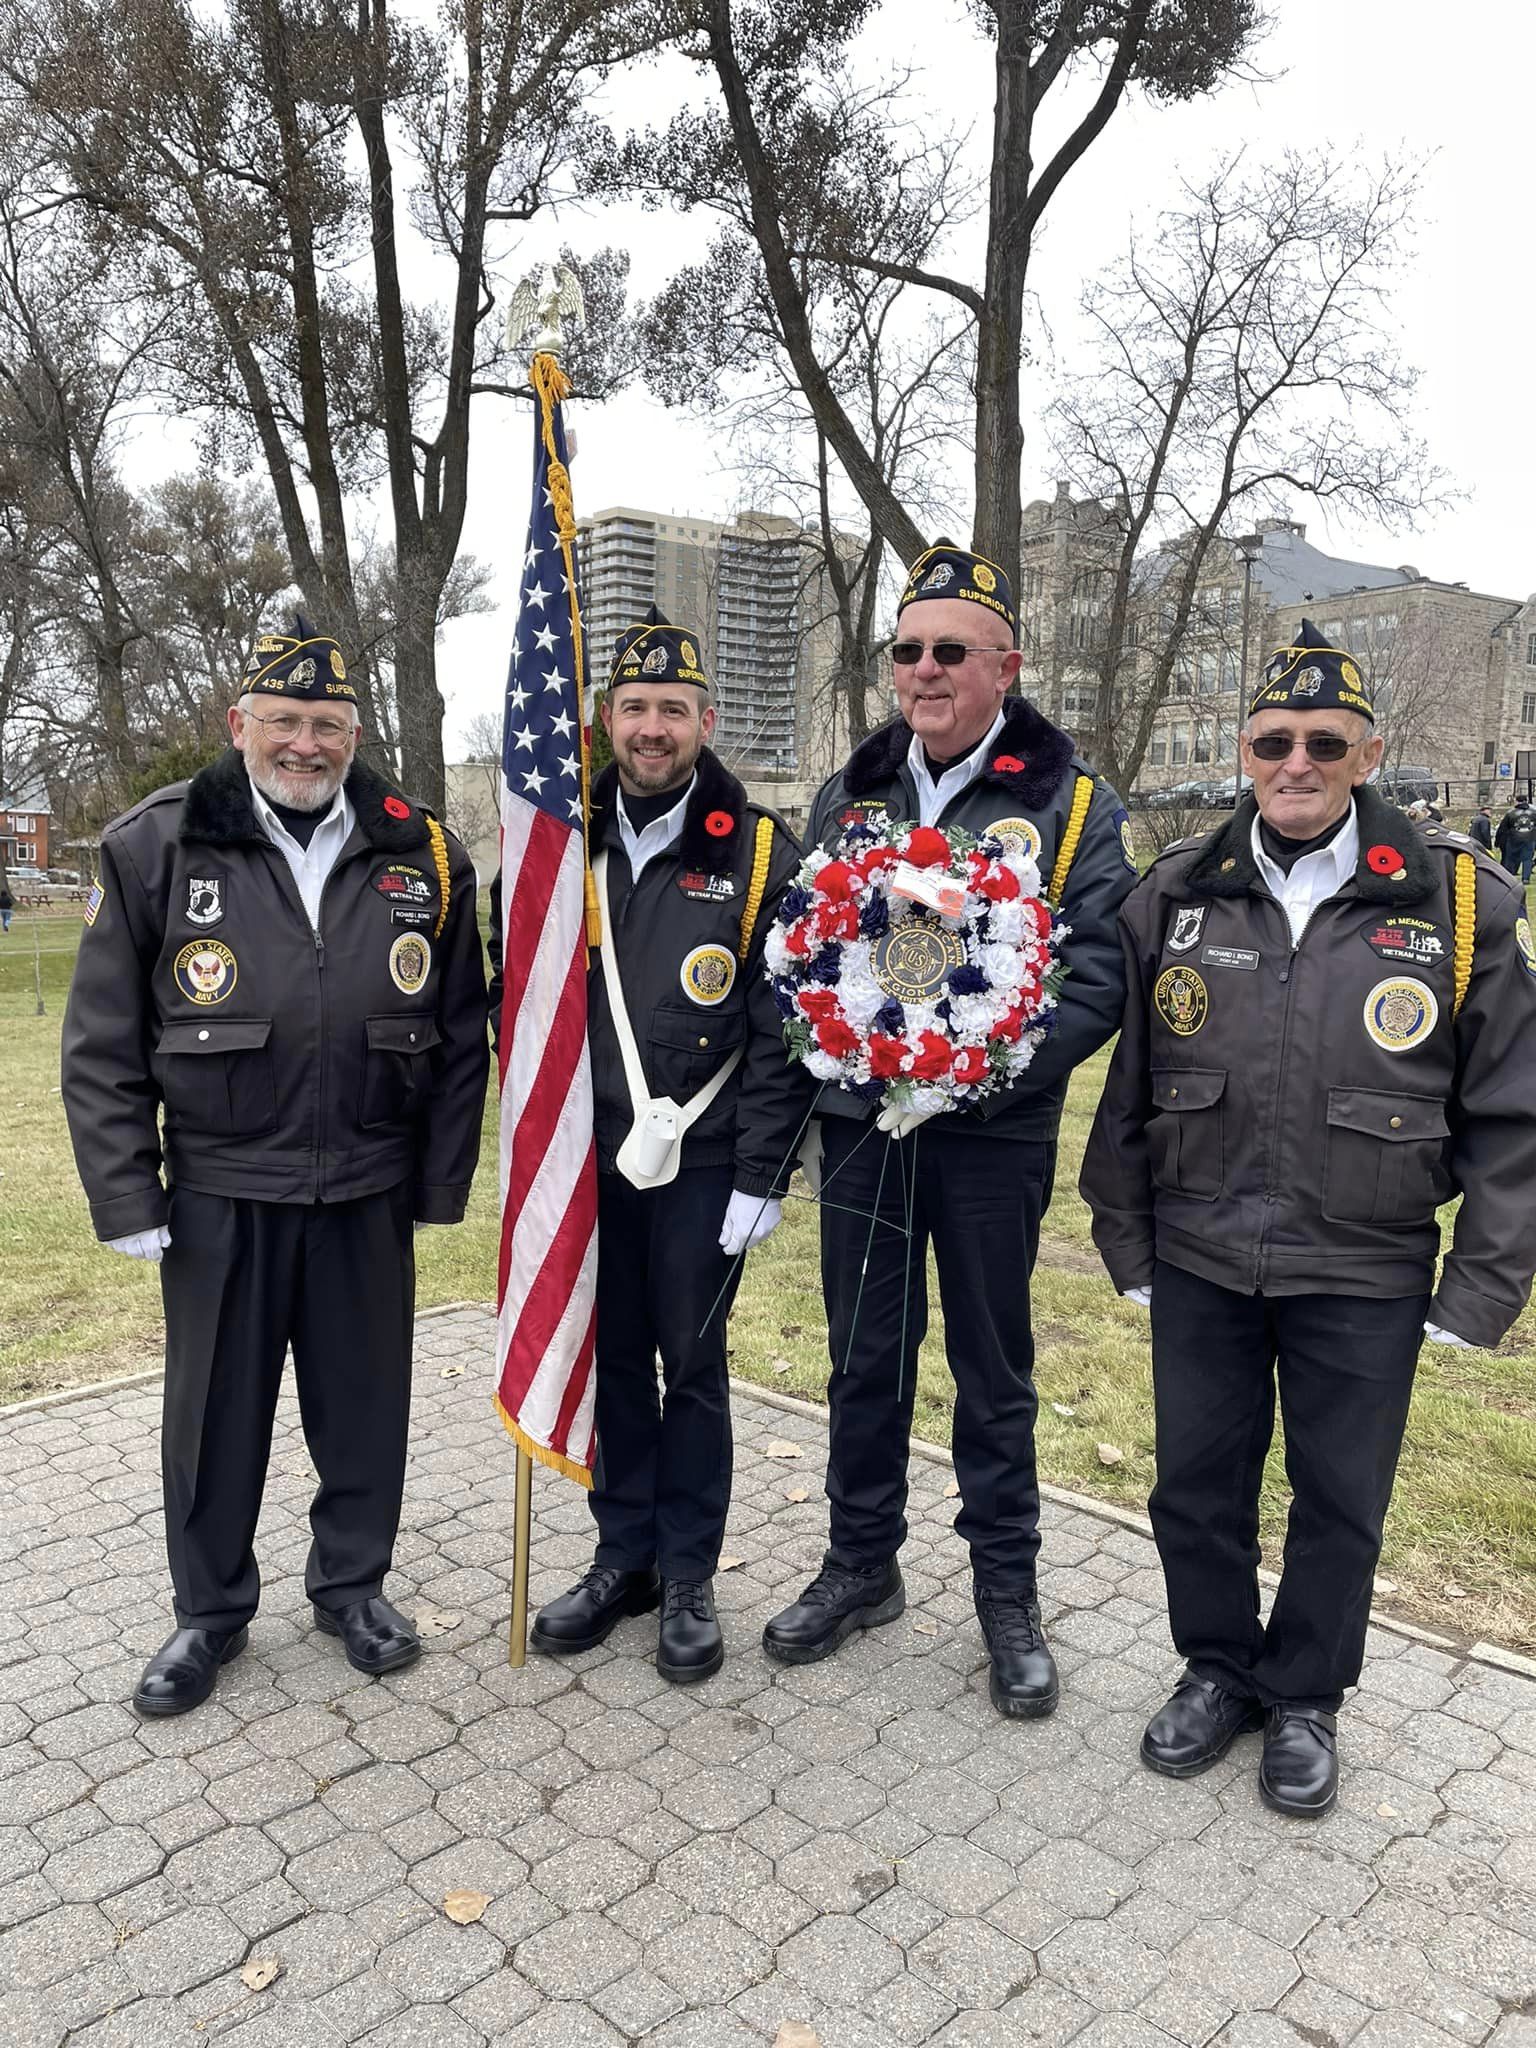 Four male veterans at a memorial day ceremony.